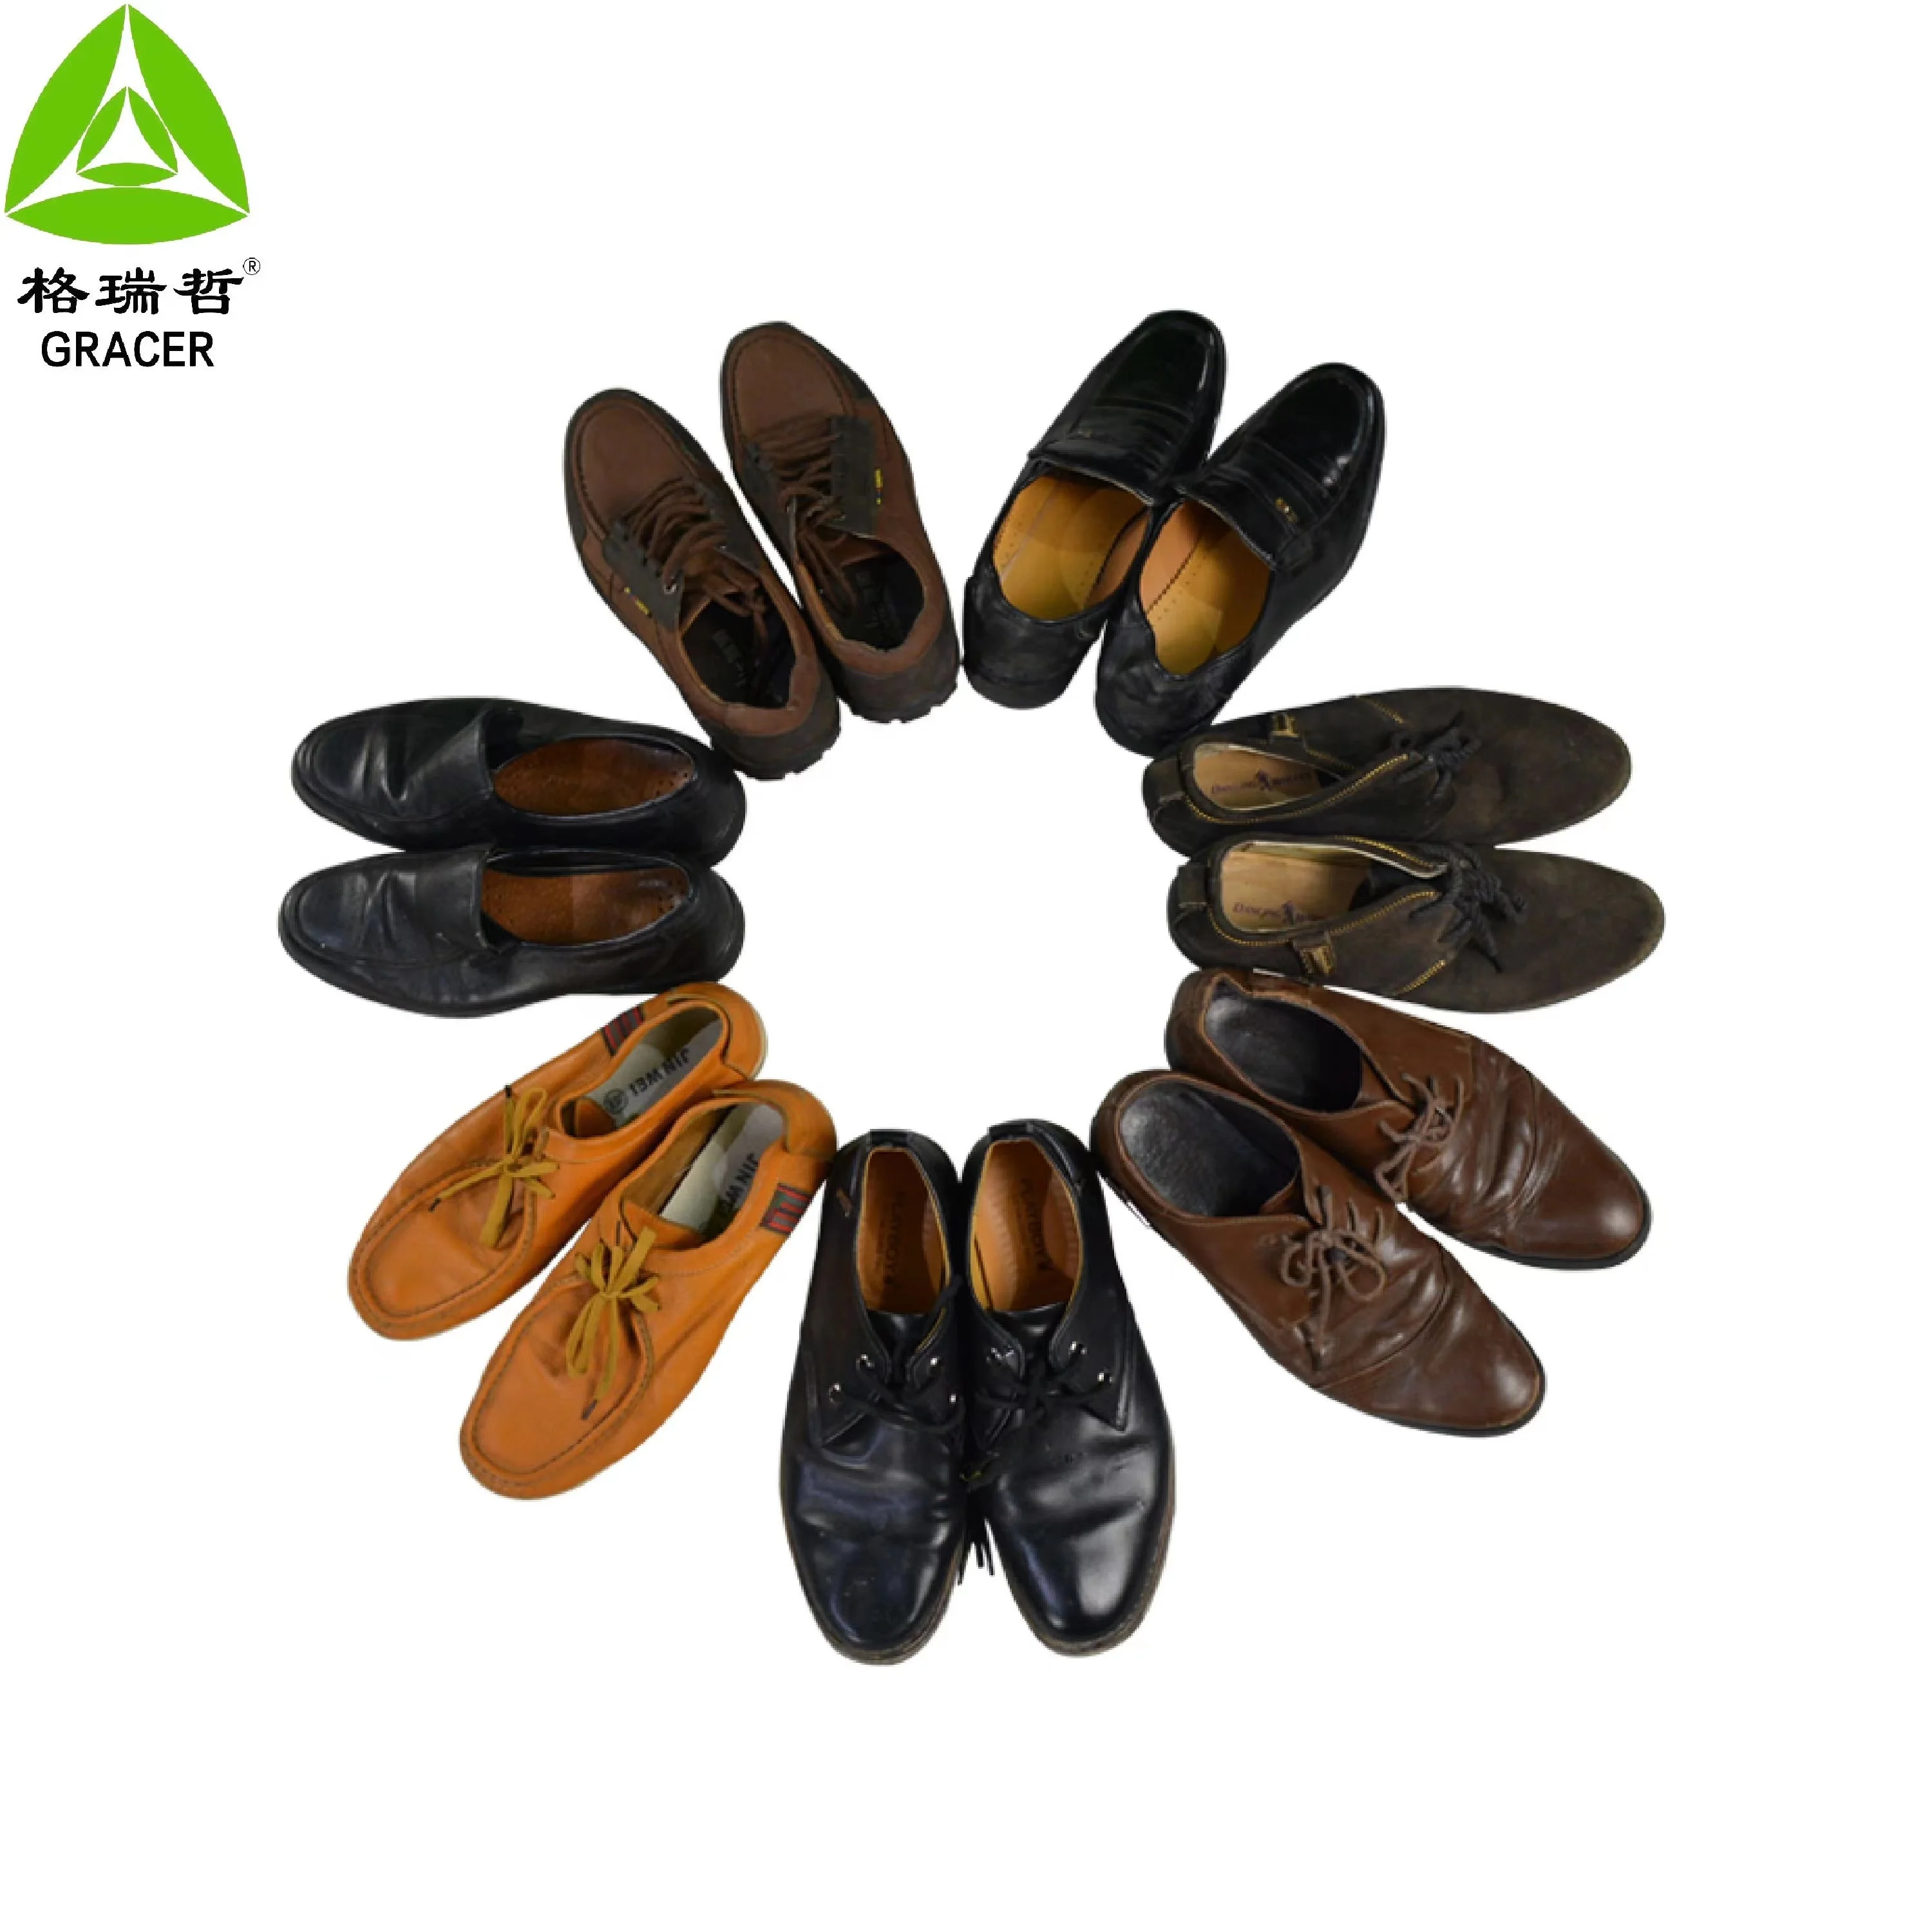 Mixed Men Second Hand Leather Shoes In South Africa Used Shoes - Buy Second  Hand Leather Shoes,Mixed Men Used Shoes,Used Shoes In South Africa Product  on 